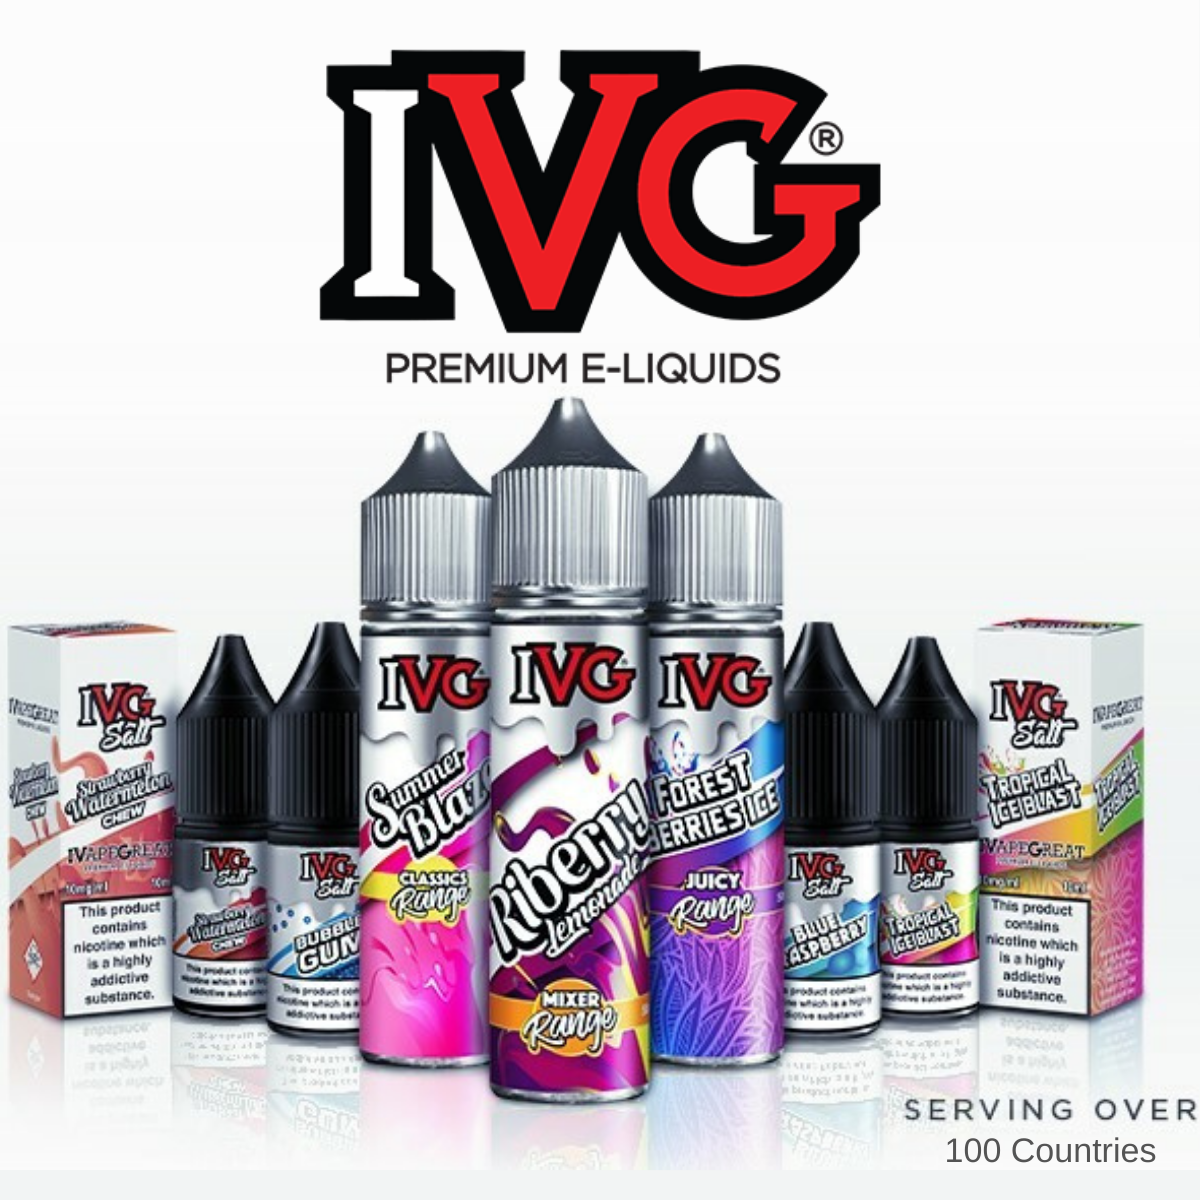 I Vape Great offers one of the largest online ranges of premium e-liquids that are all made in the UK and have a wide selection of vape devices for you to ...